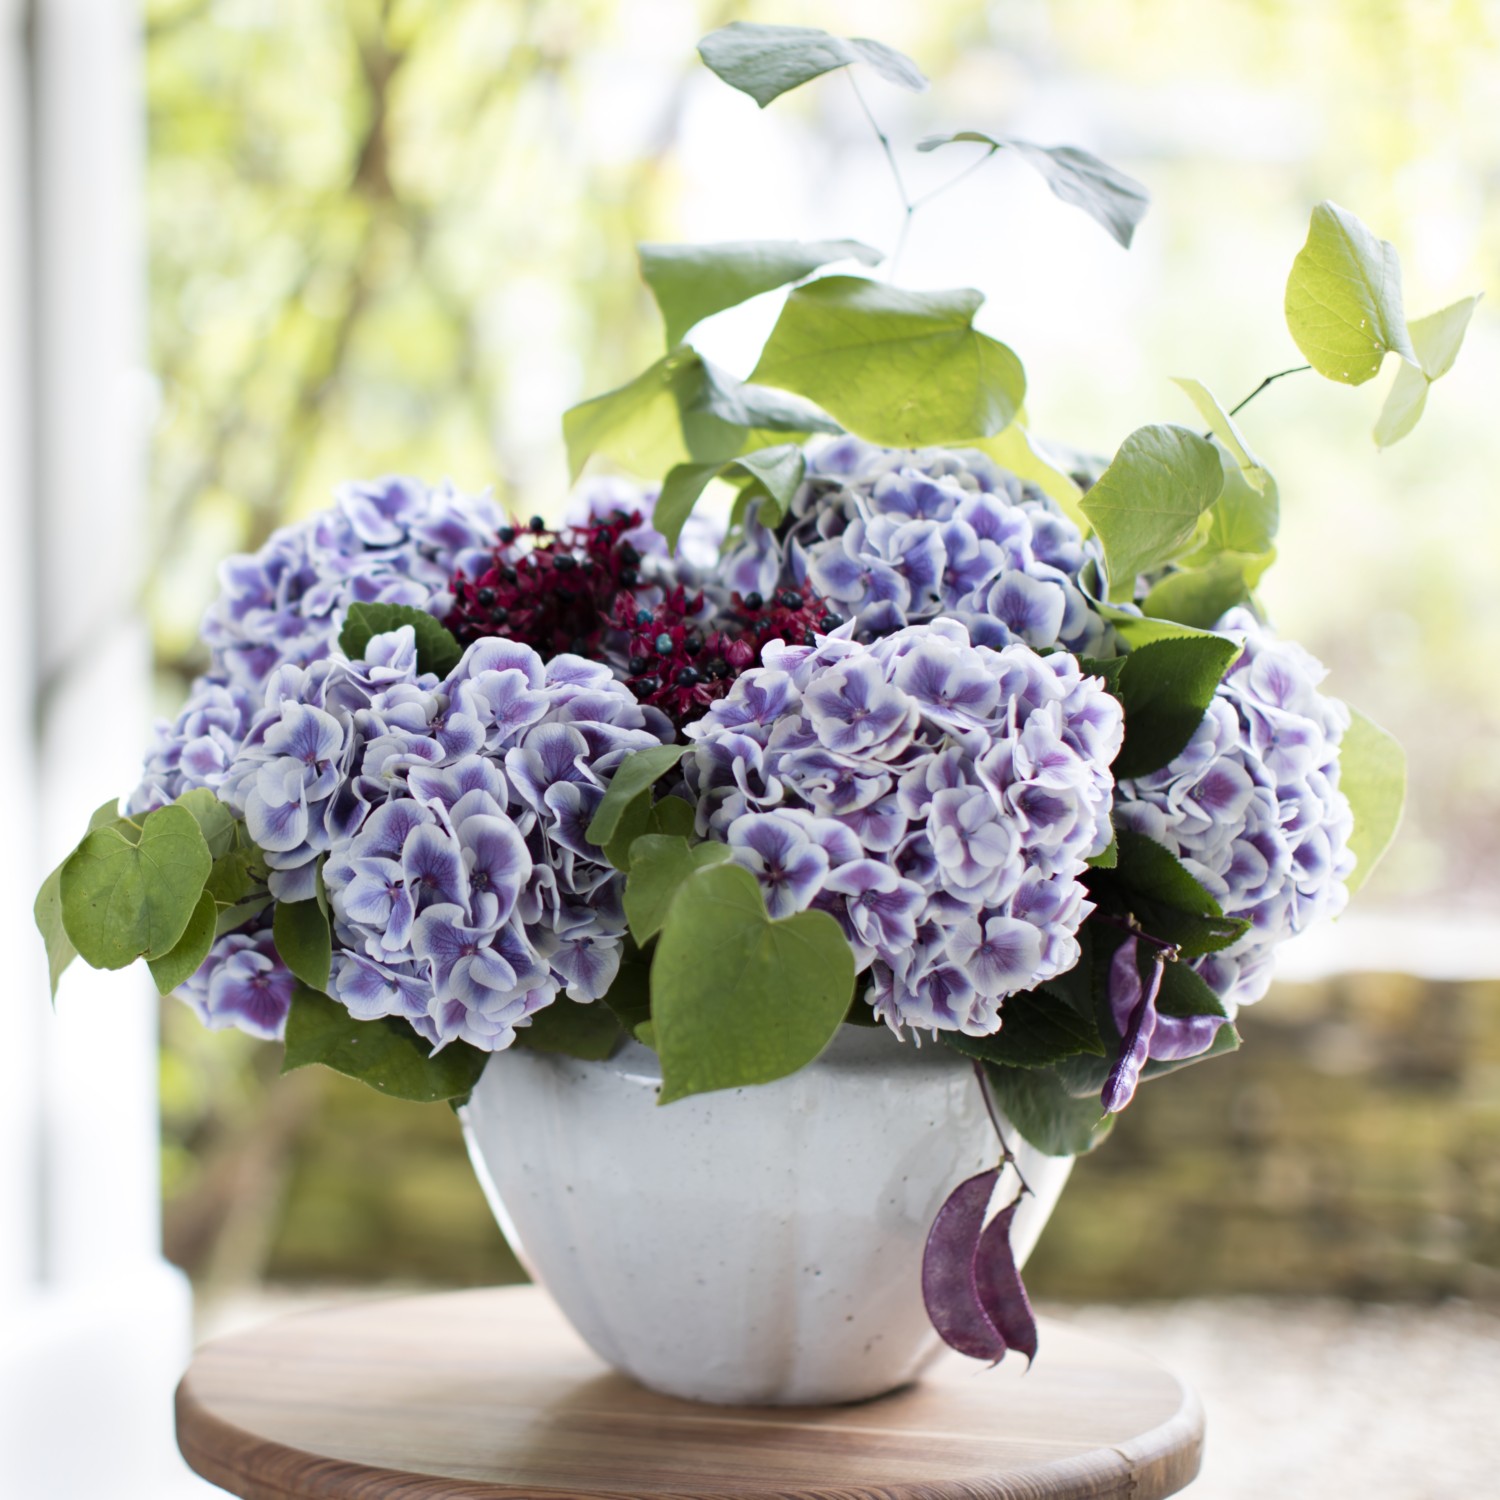 Purple washed hydrangeas and redbud leaves star in this casual summer arrangement.